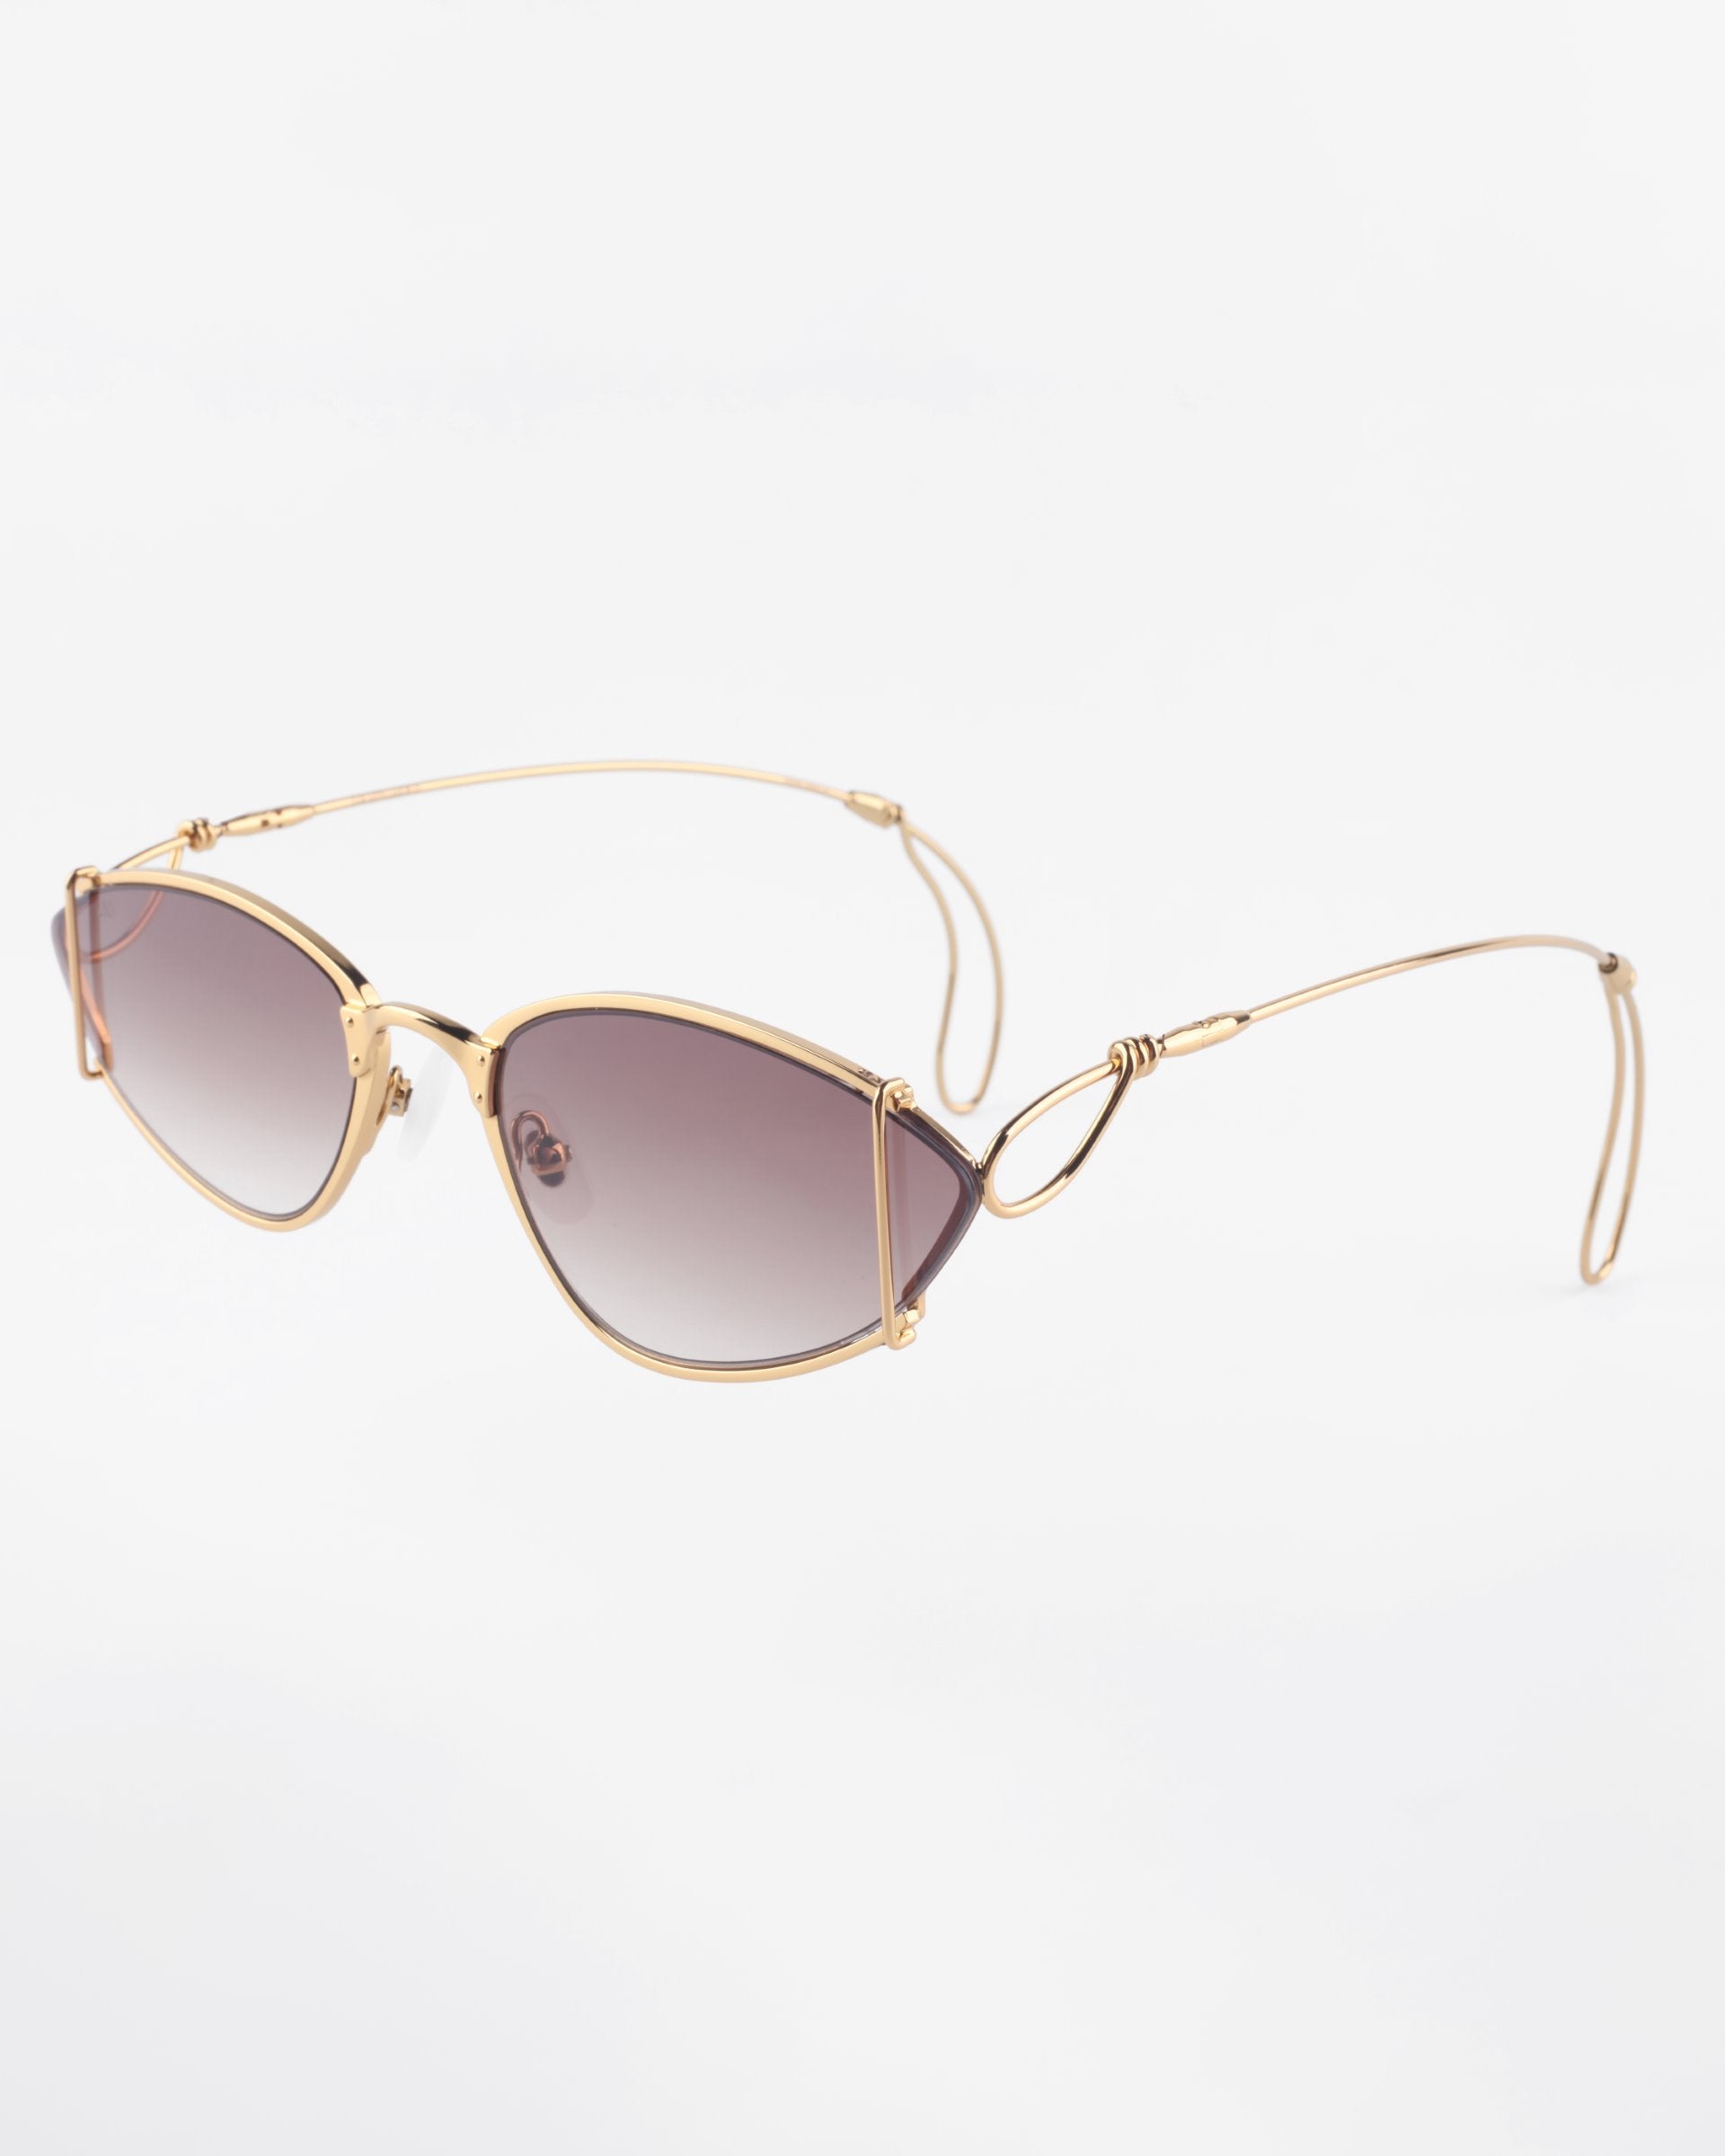 A pair of stylish For Art&#39;s Sake® Ornate sunglasses with thin, 18-karat gold-plated frames and an intricate double-bridge design. The ultra-lightweight Nylon lenses are tinted in a gradient from dark at the top to lighter at the bottom, offering 100% UVA &amp; UVB protection. The temples have a sleek curve, ending in curved earpieces.